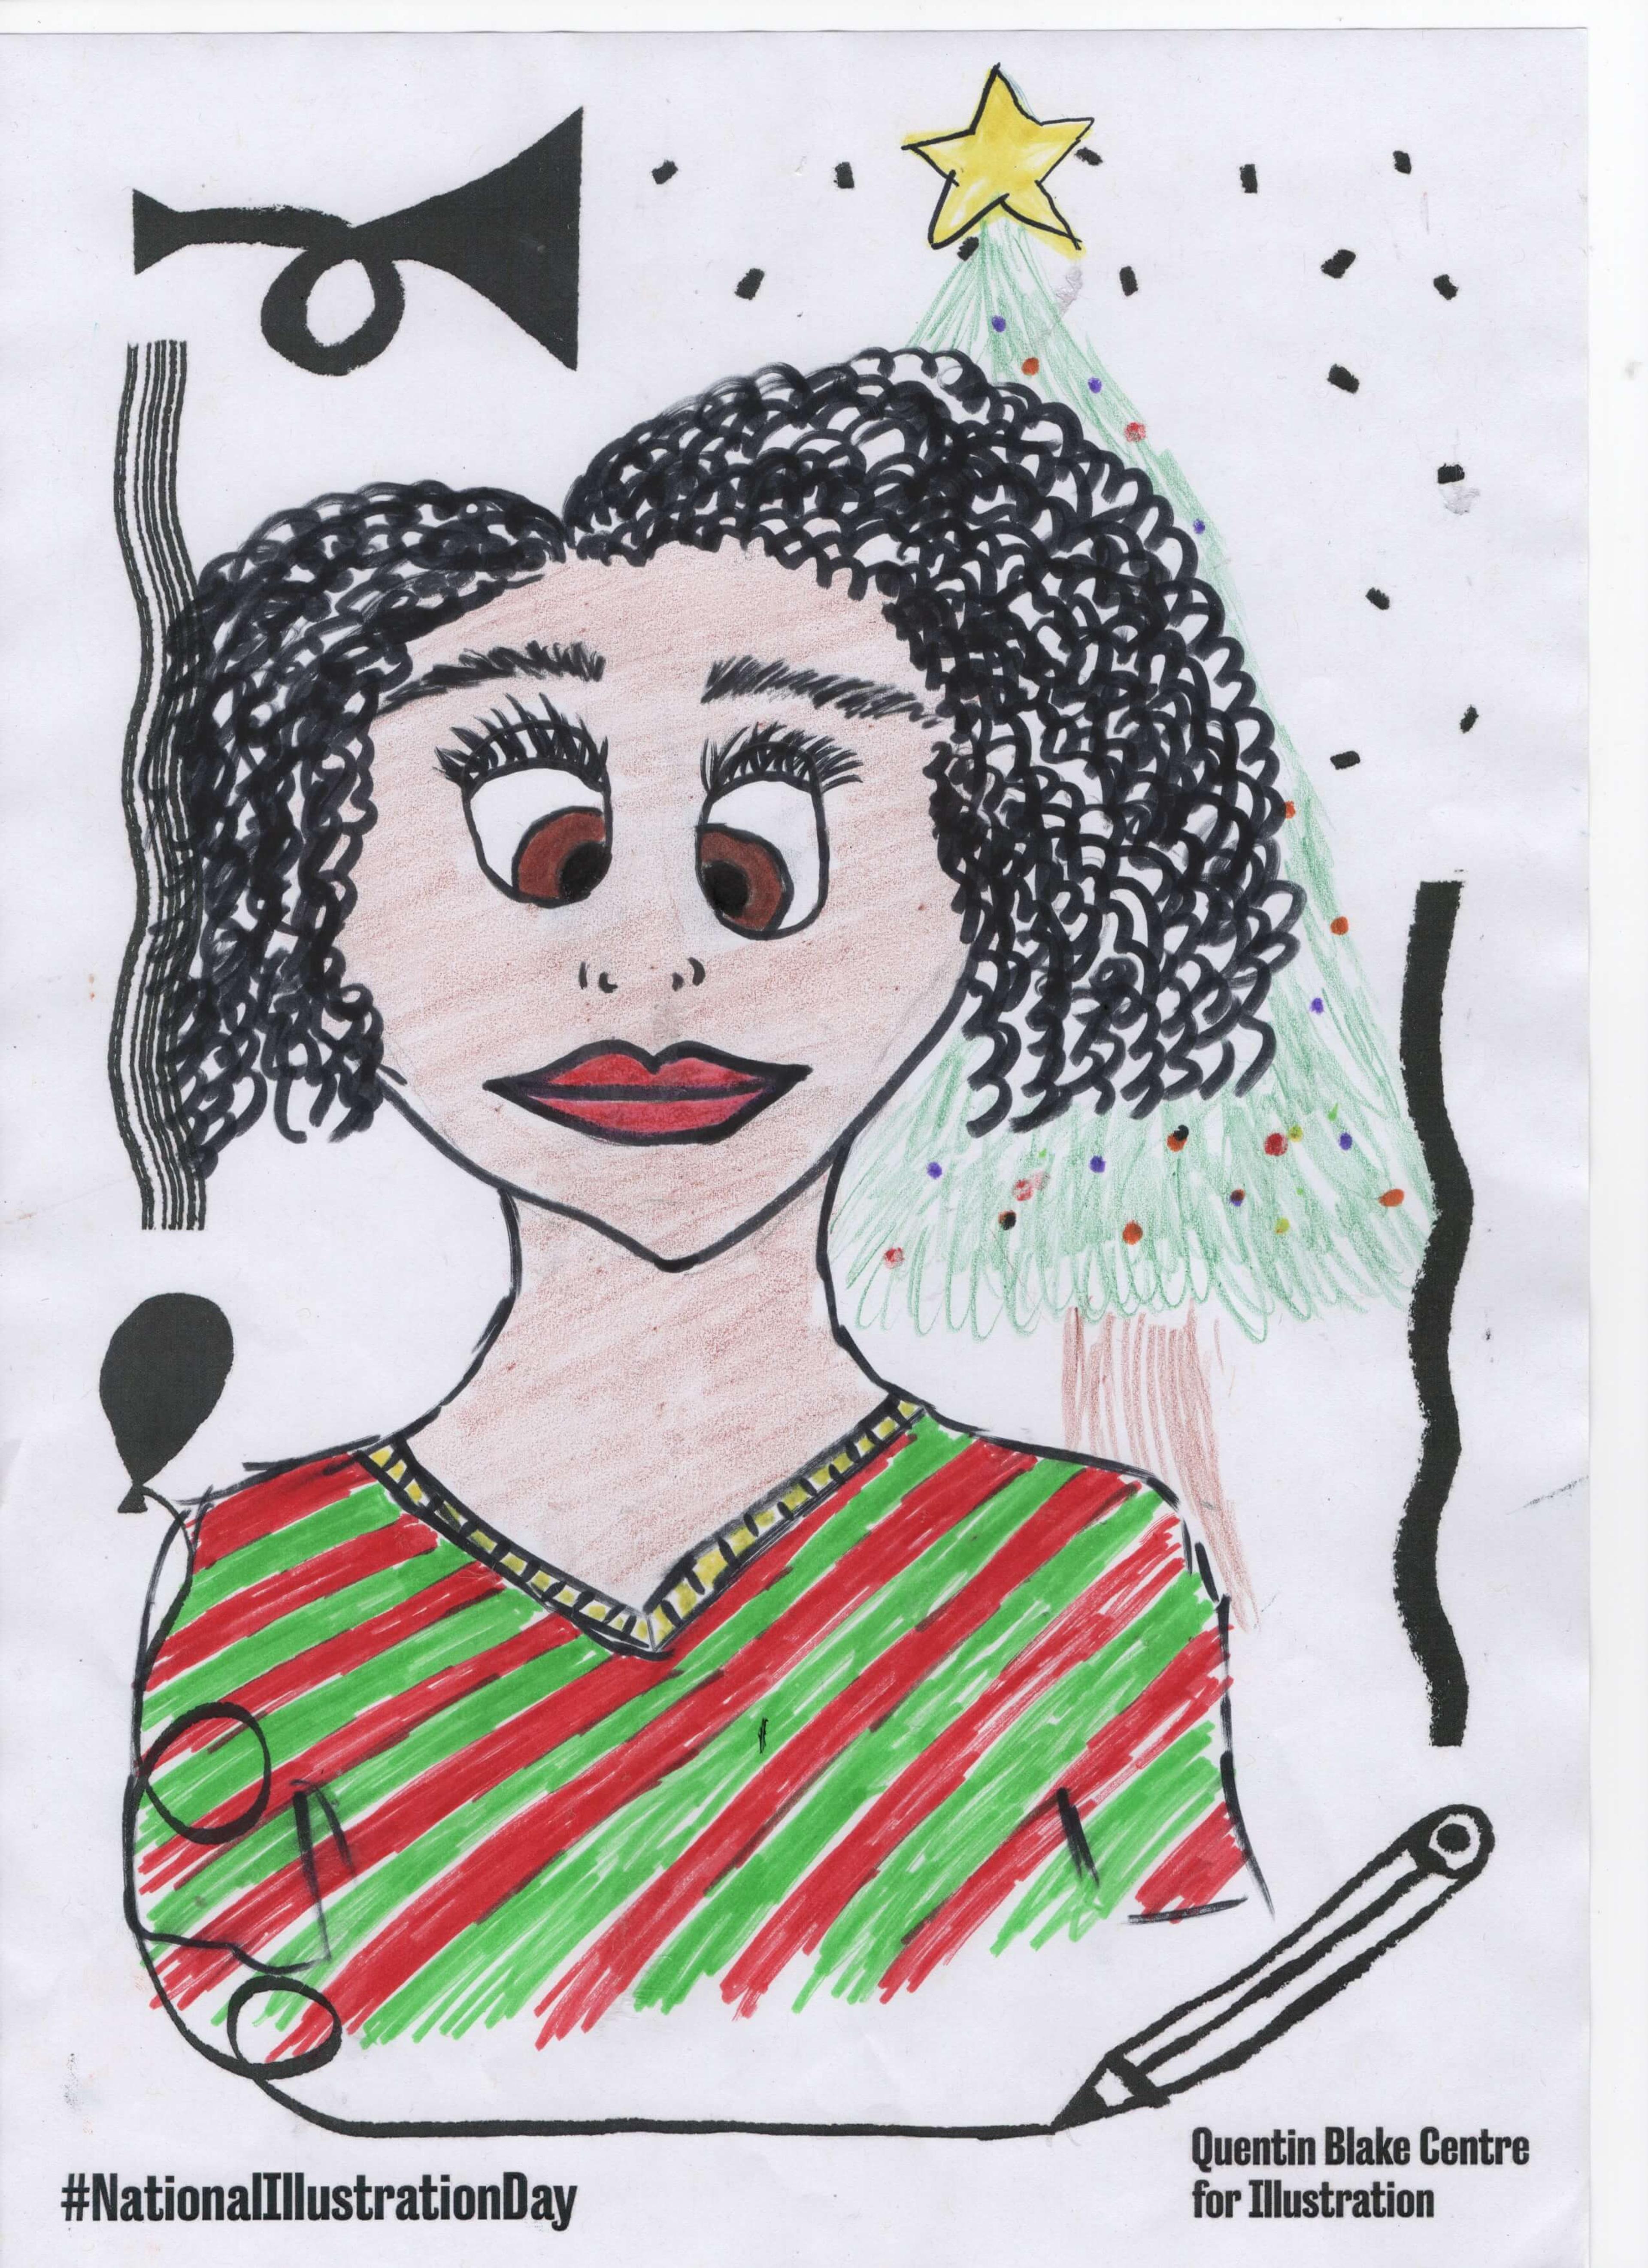 Stylised portrait of a person with coily hair and big brown eyes, wearing a striped red and green top.